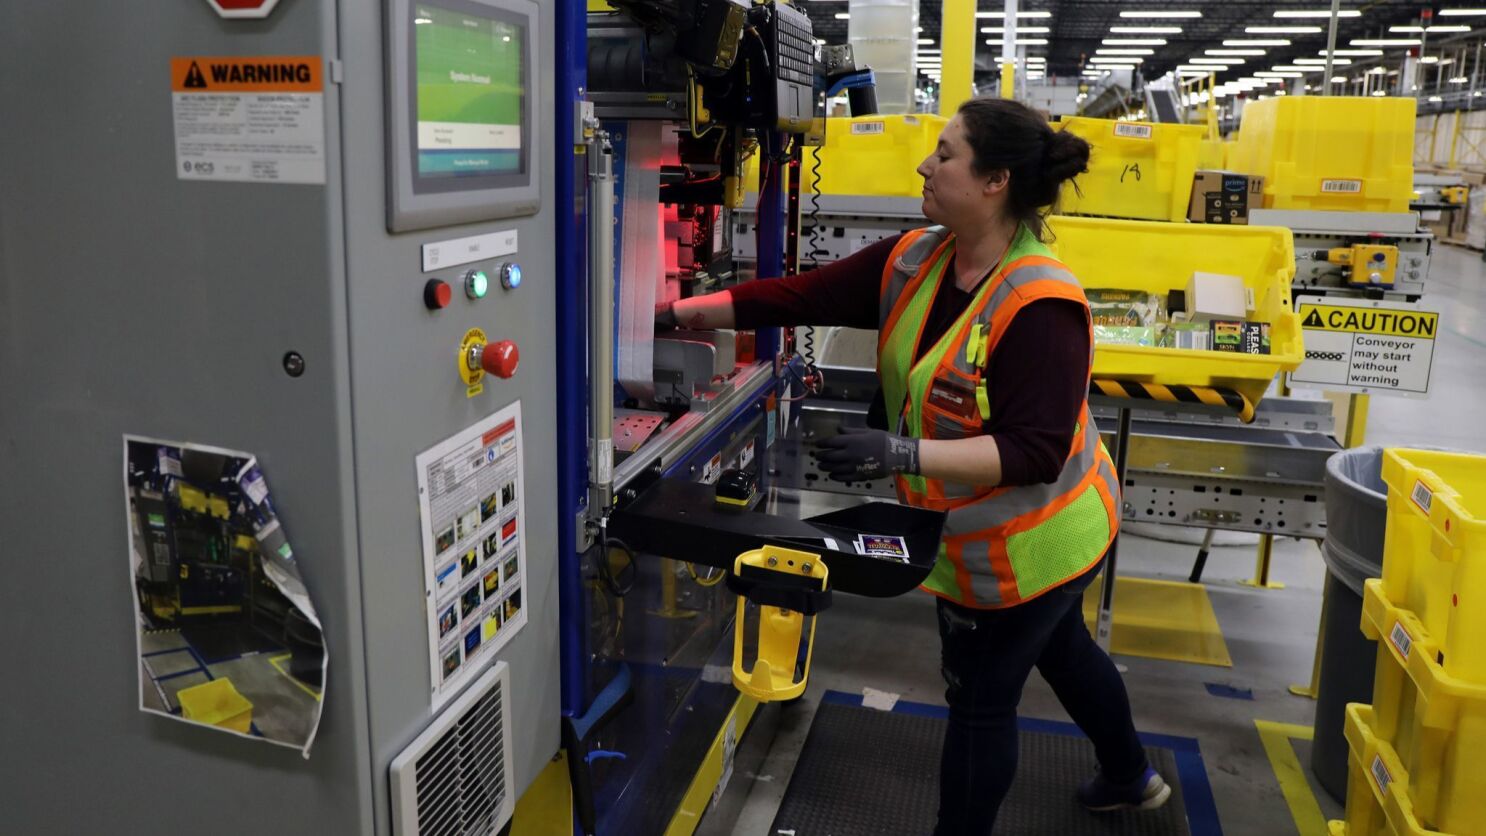 Column Amazon Is Defined By Billions But Its Workers Median Pay Is 28 446 Los Angeles Times